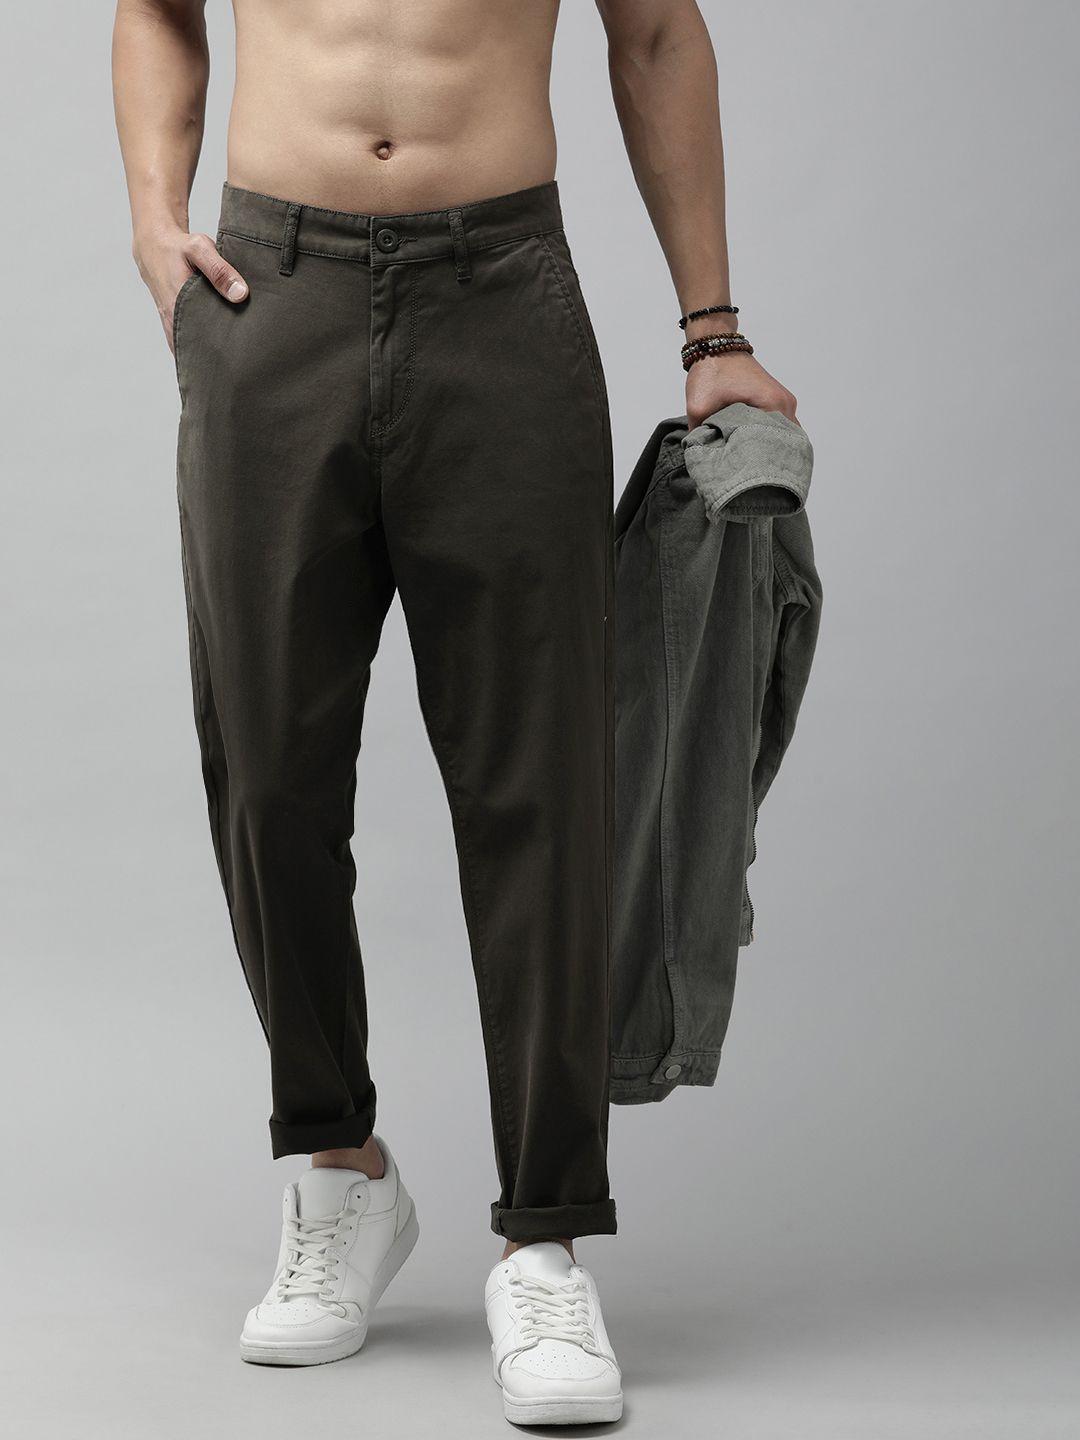 the-roadster-life-co.-men-relaxed-fit-chinos